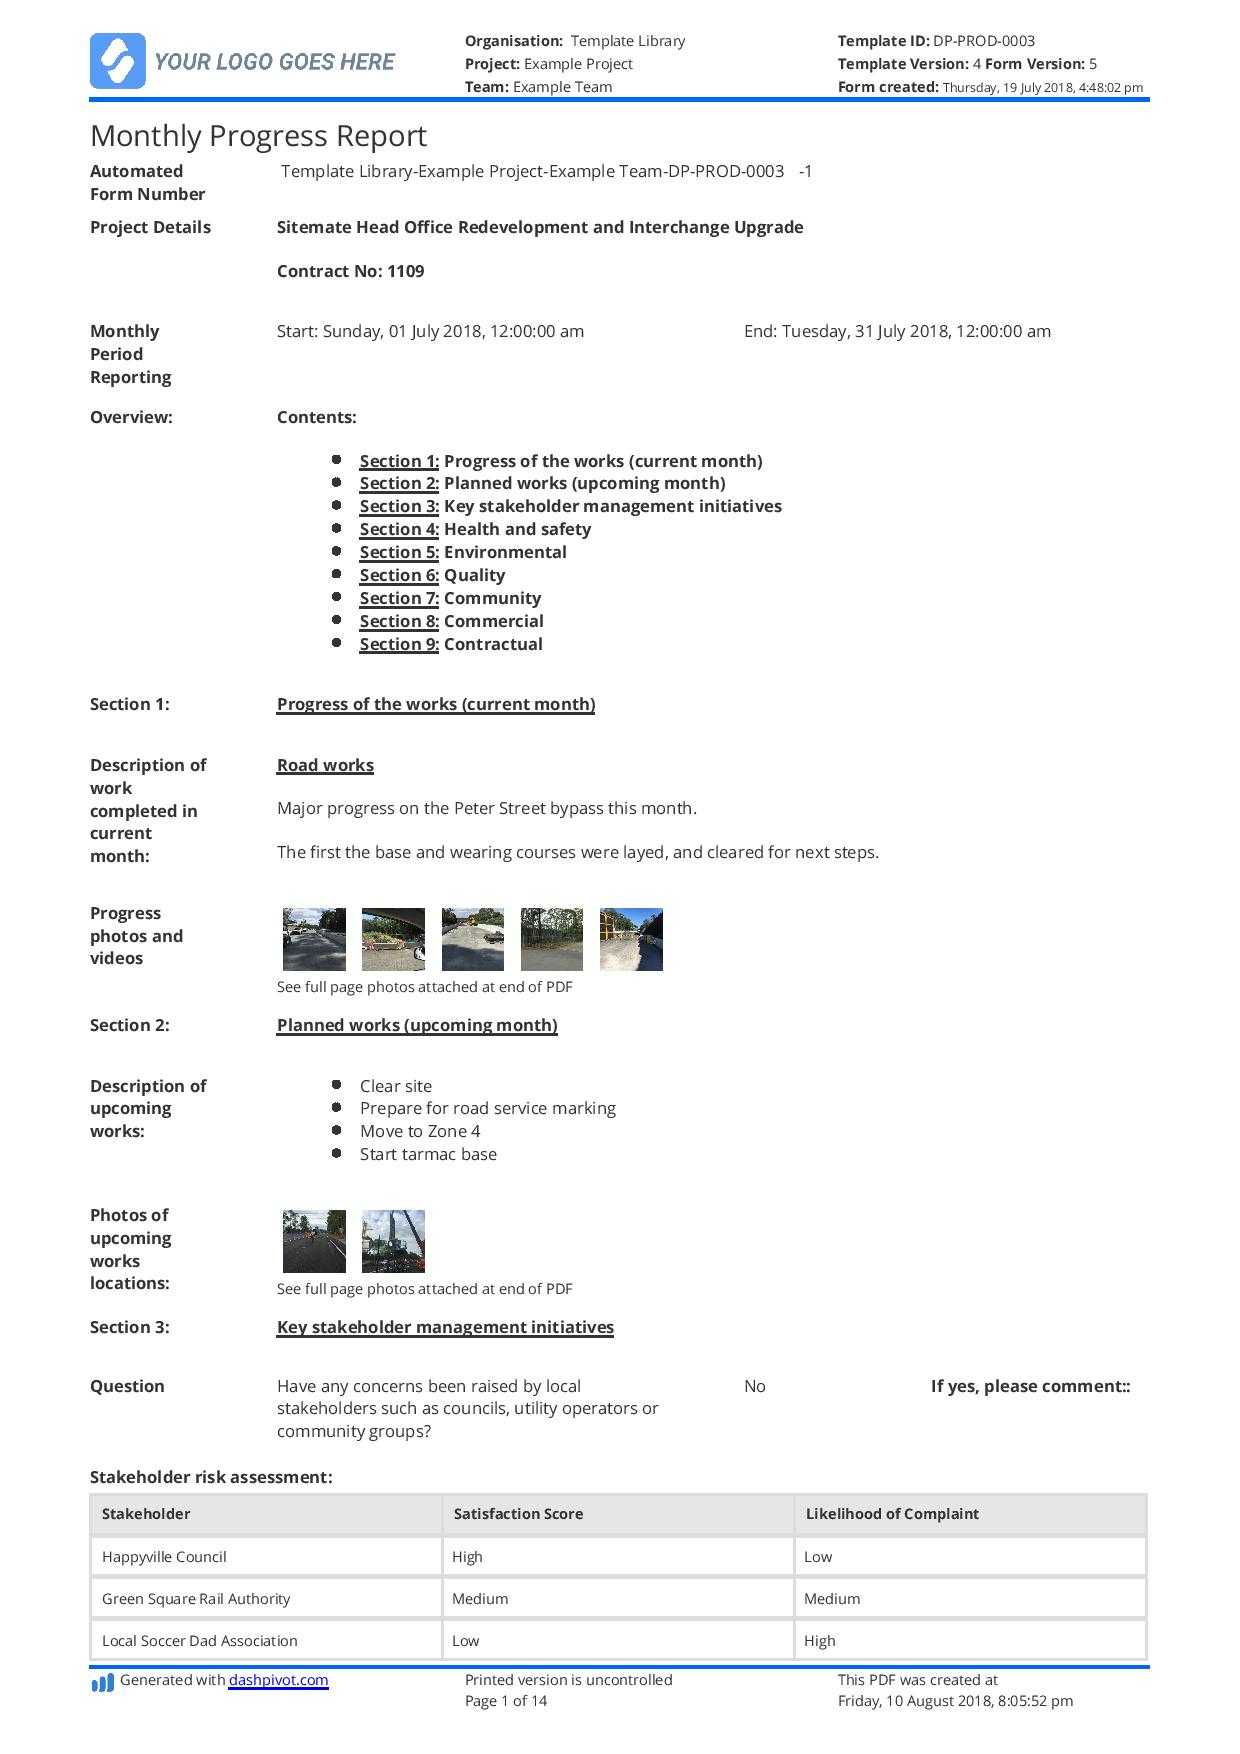 Monthly Construction Progress Report Template: Use This In Monthly Status Report Template